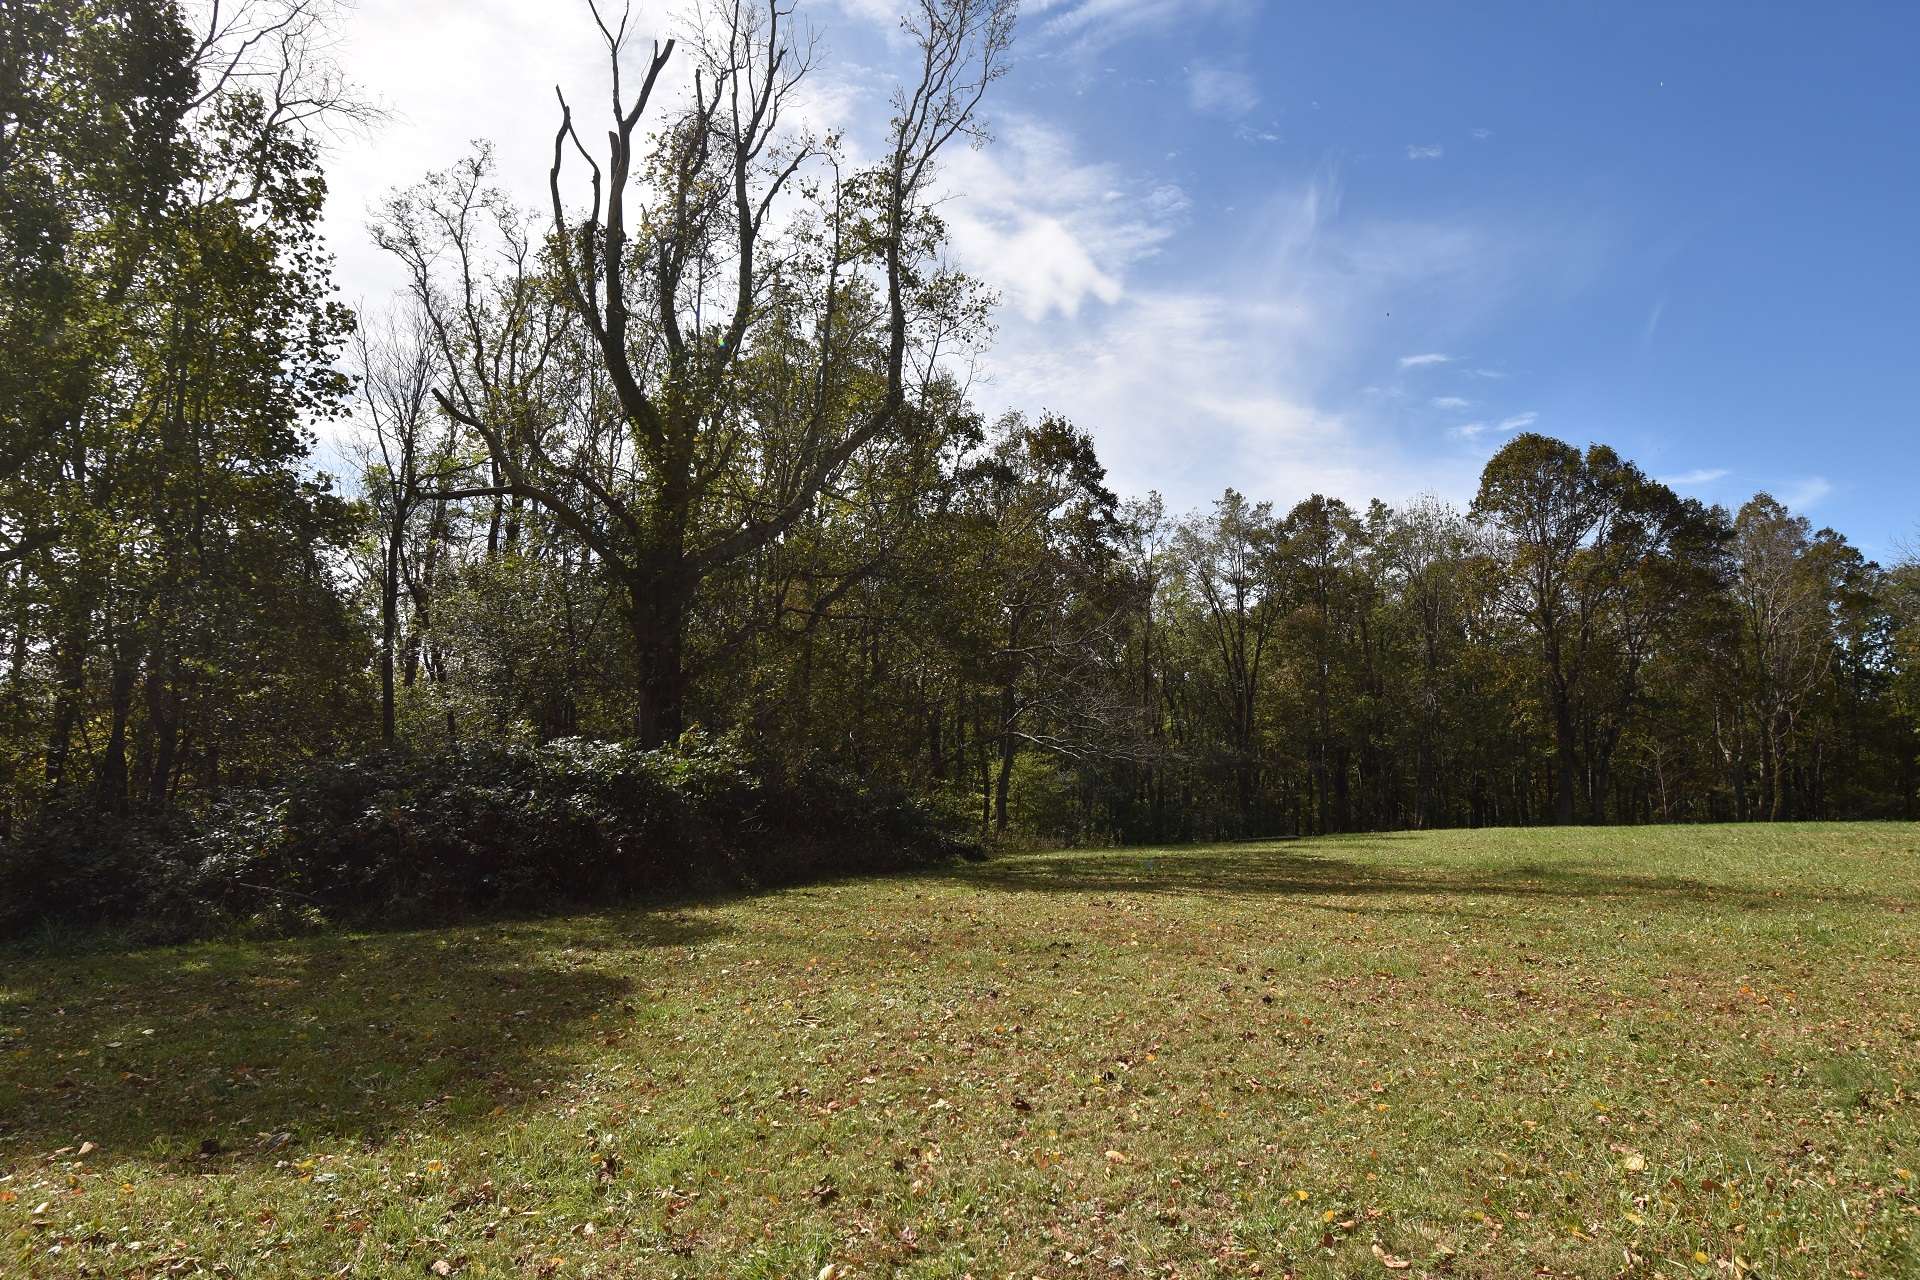 Follow the well maintained paved roads to your level and ready to build lots.  Lots 33 and 34 offer a total of 2.47 acres , a wonderful  option to construct your dream NC Mountain home.